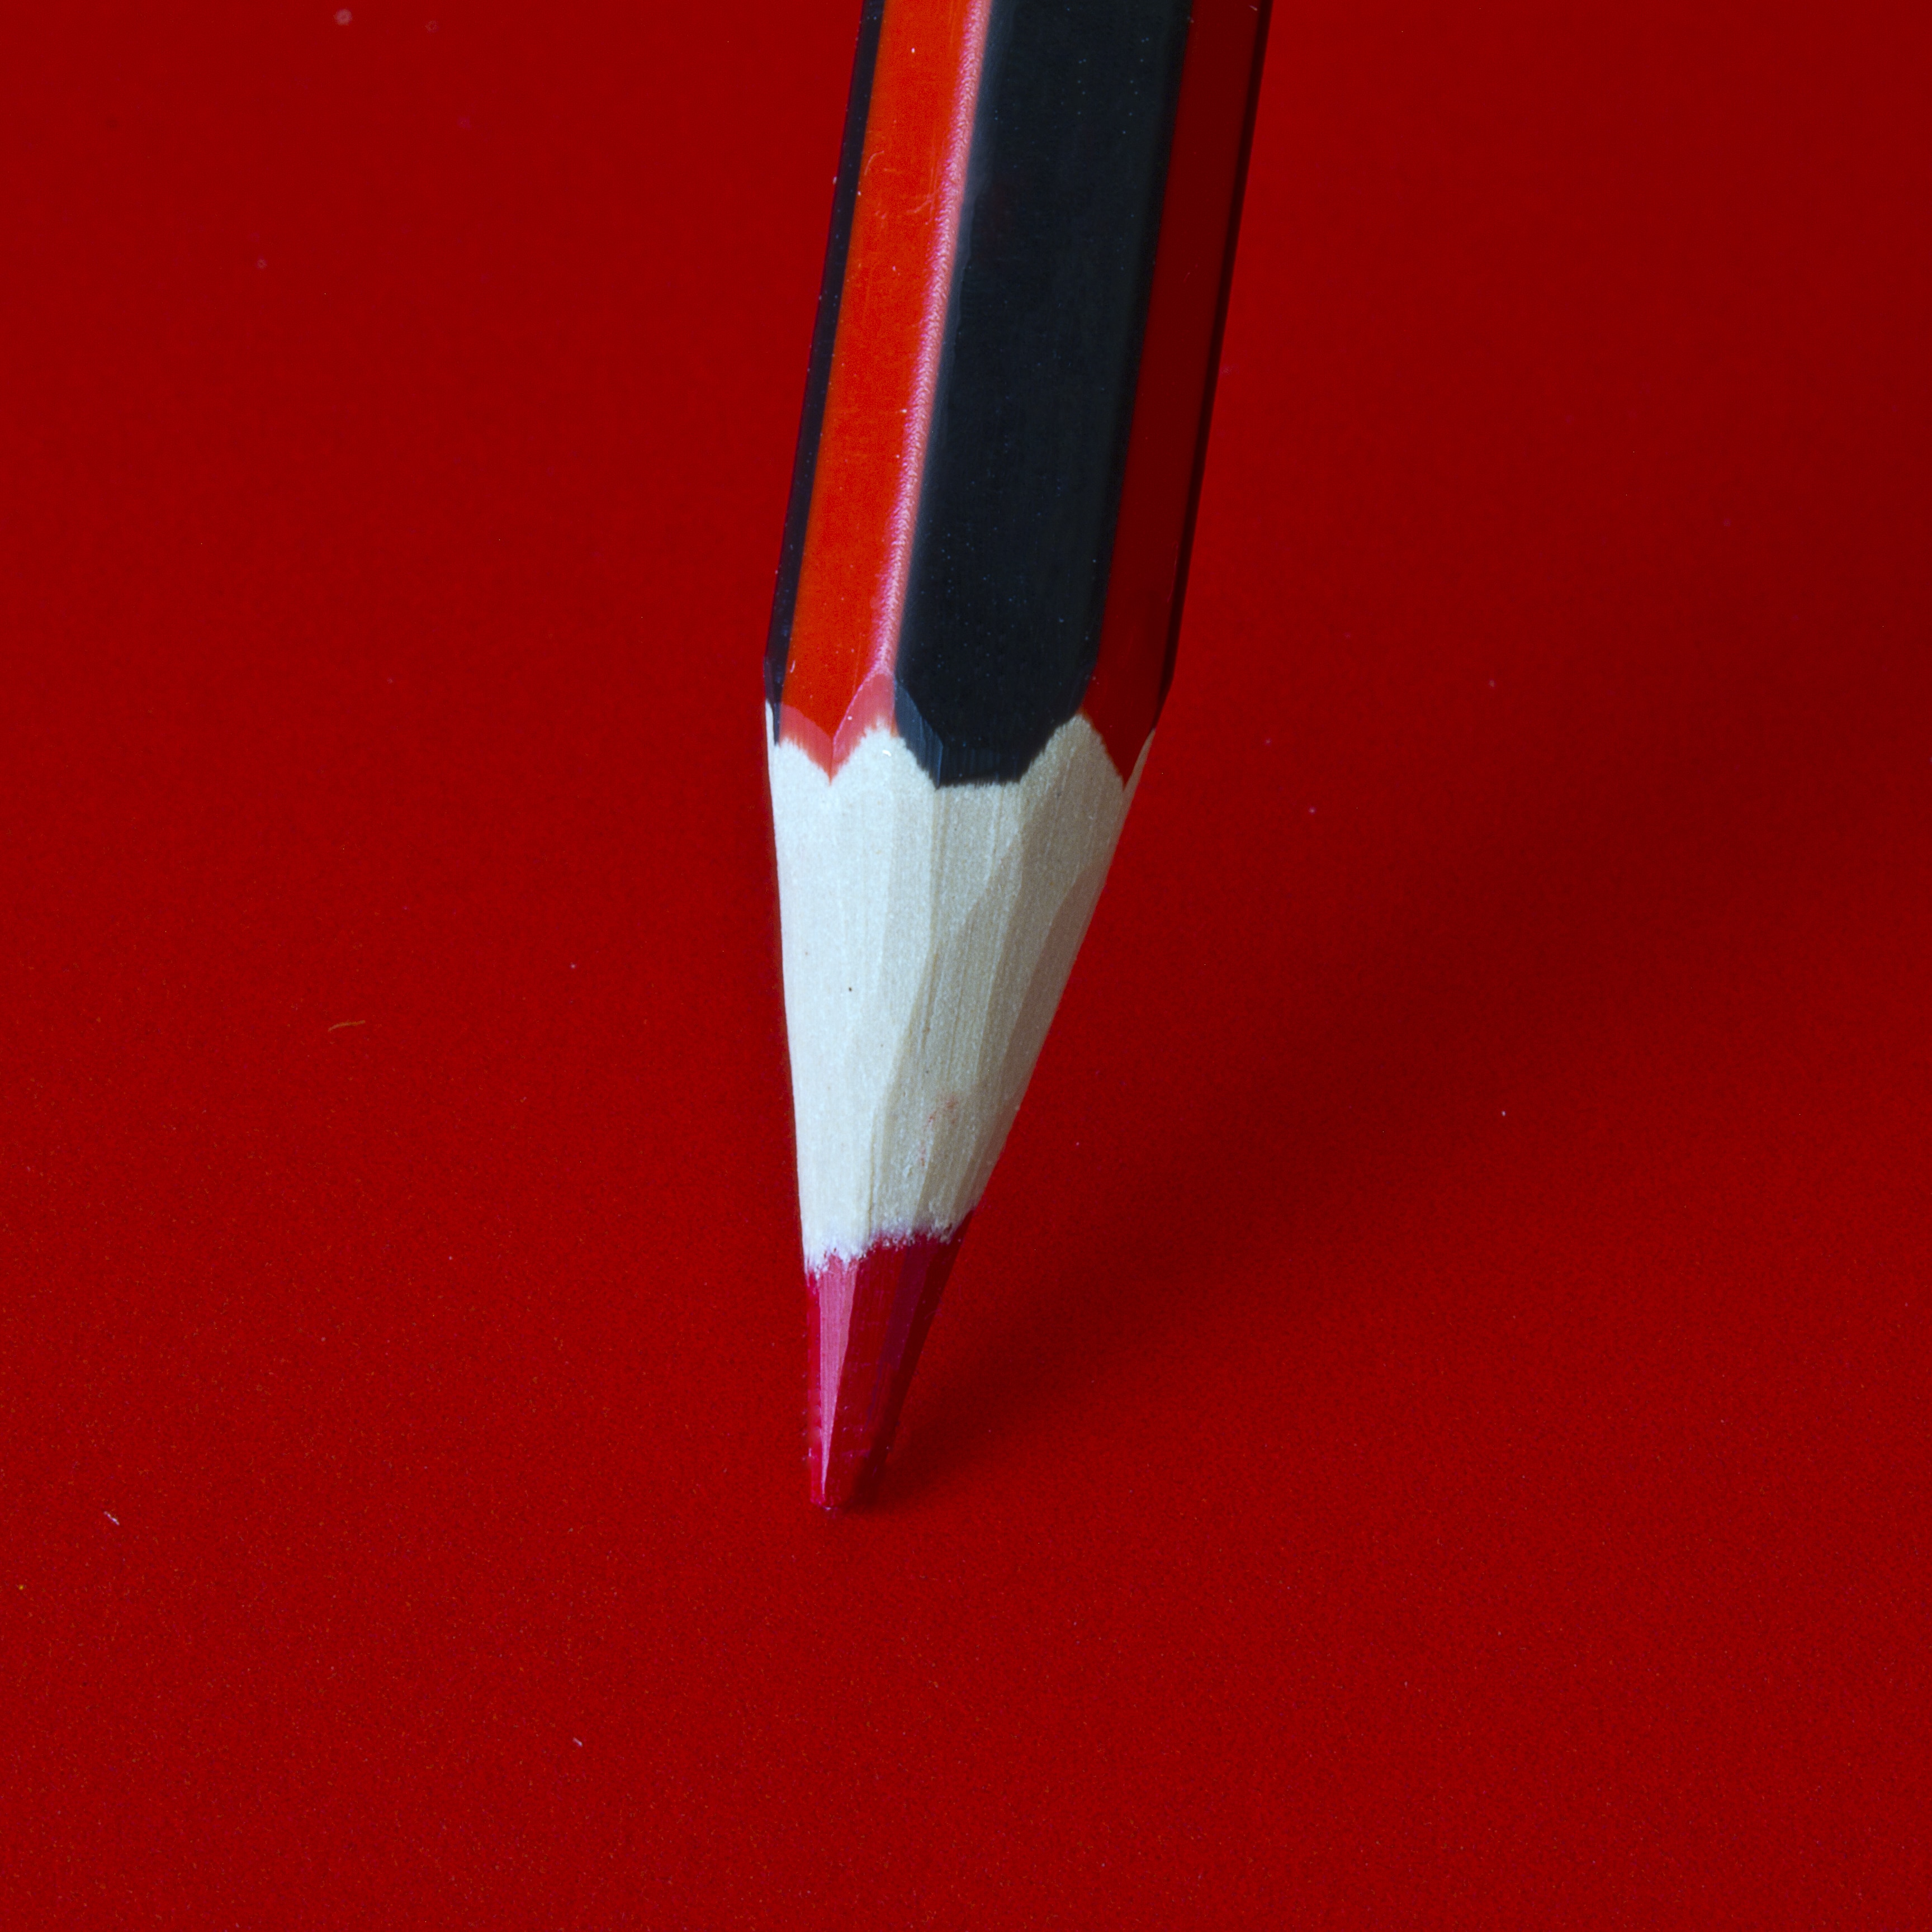 red and black pencil